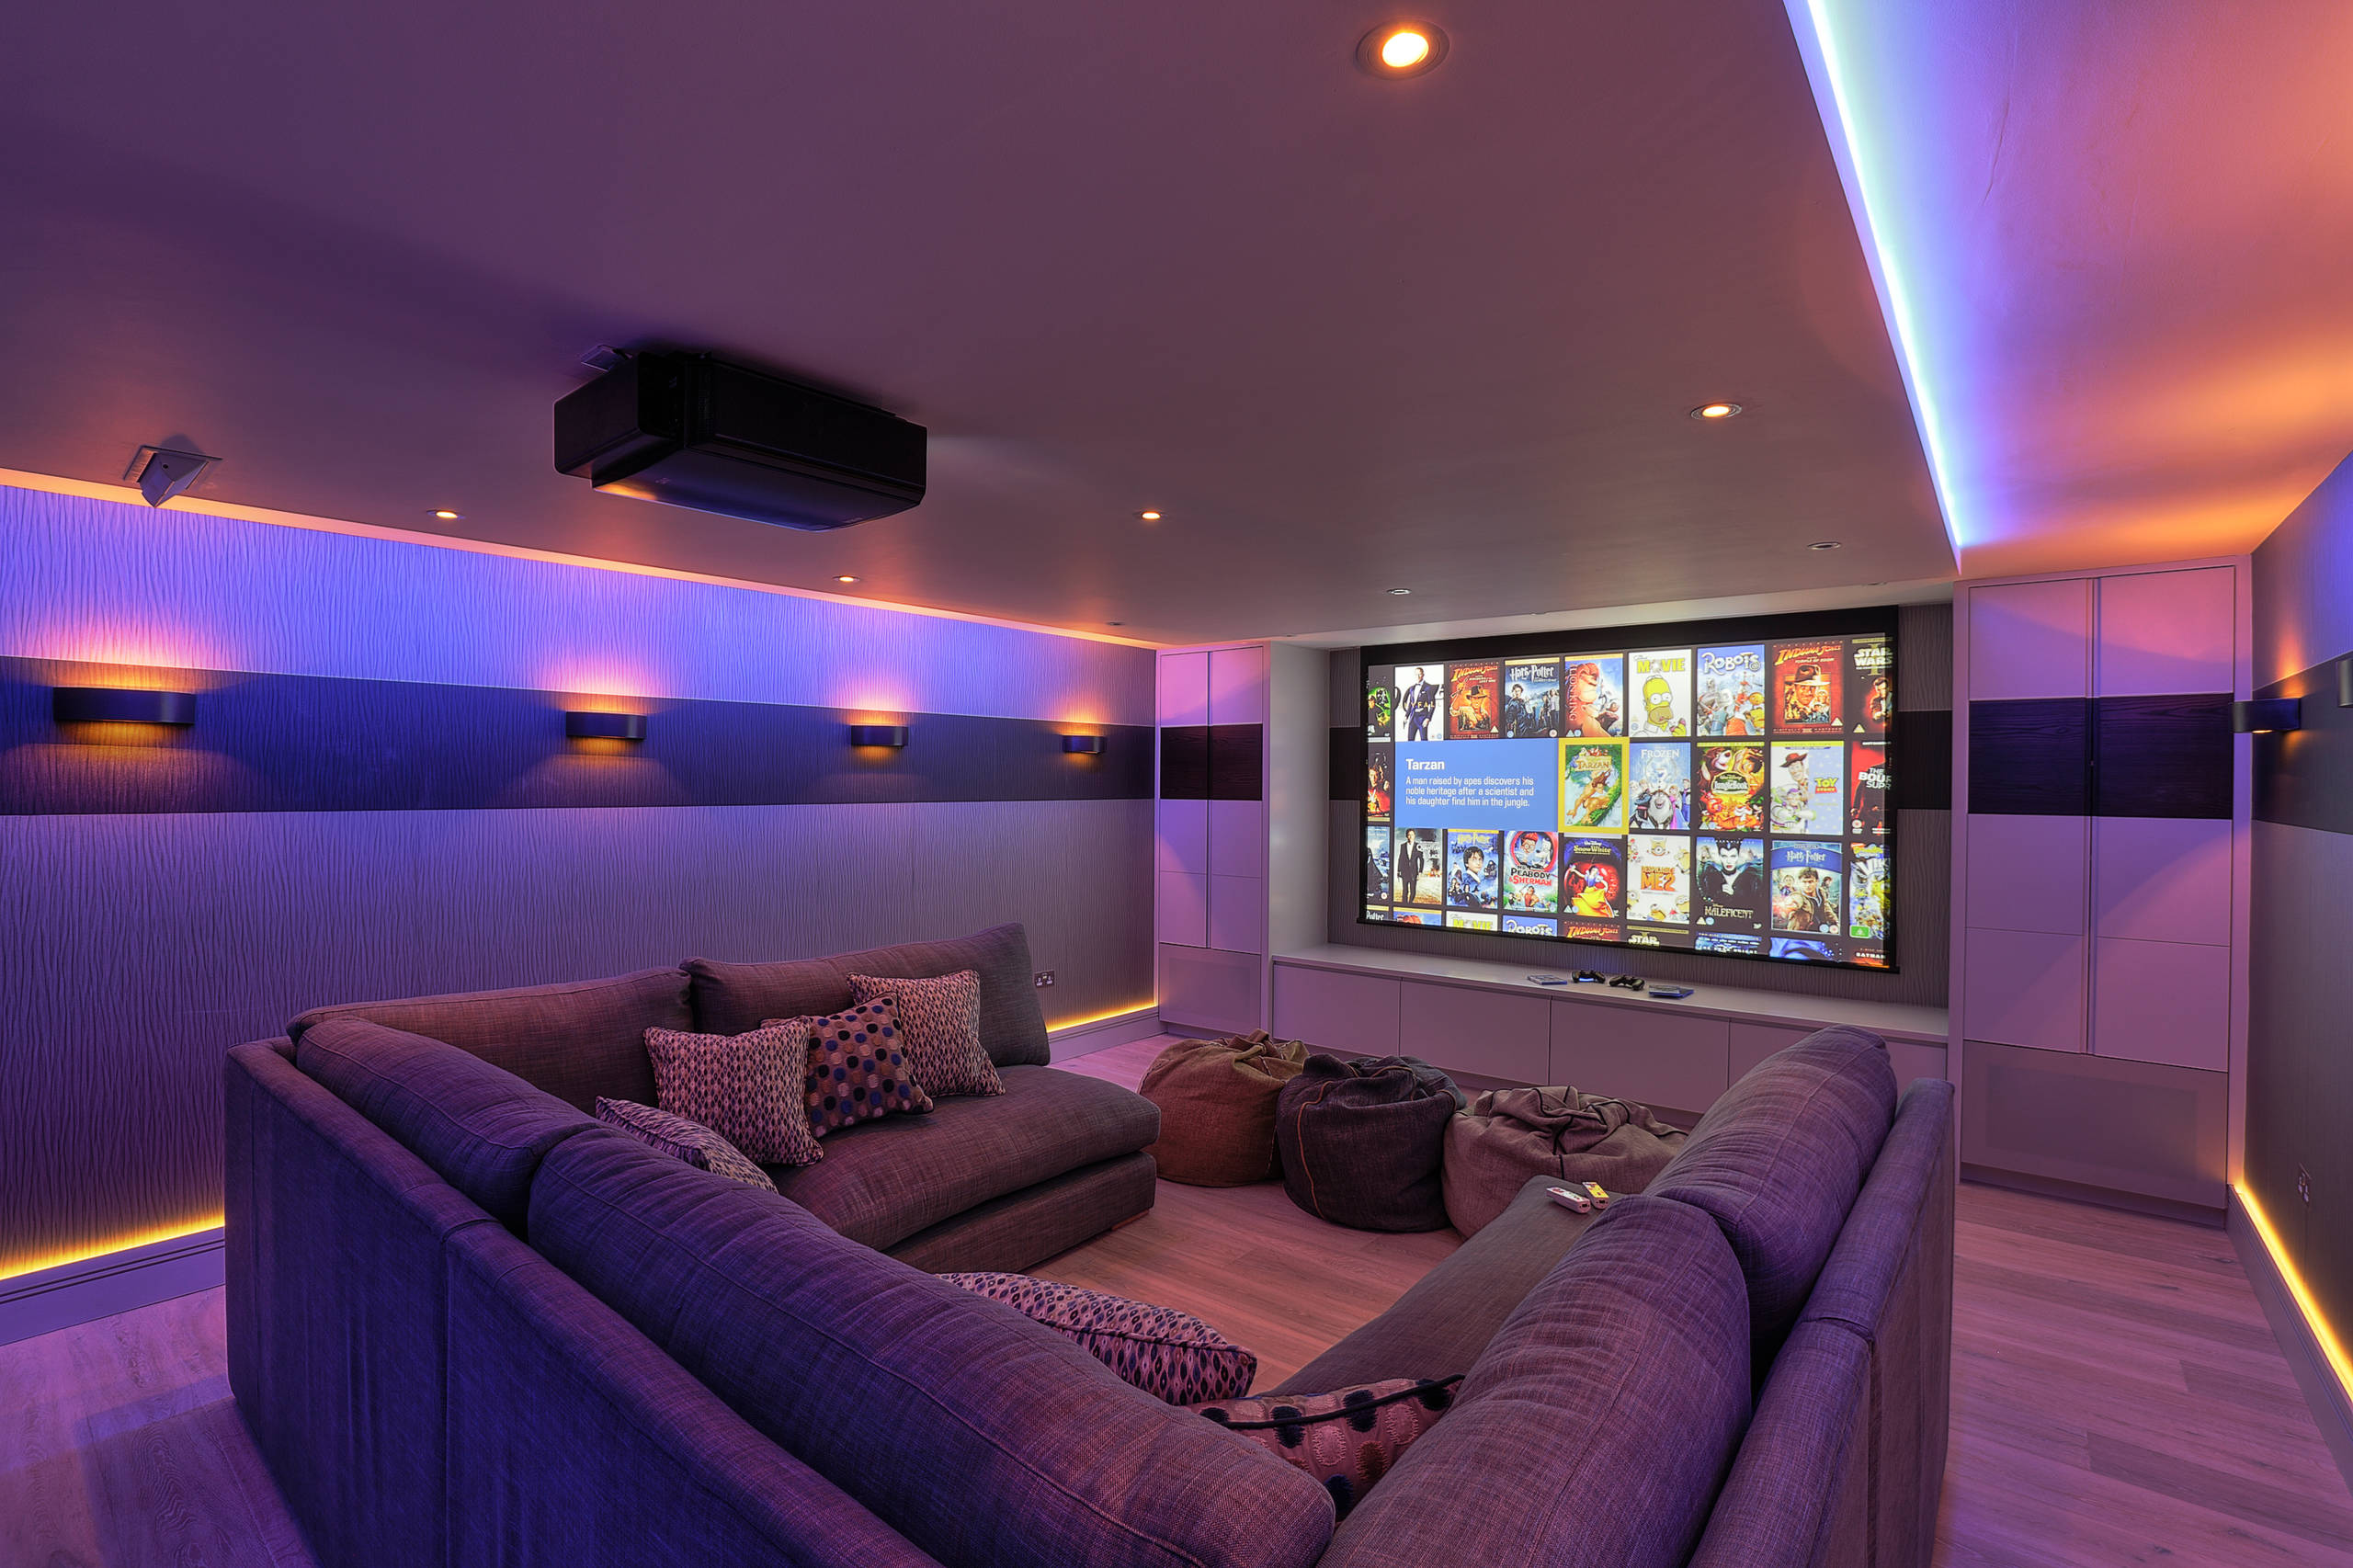 75 Beautiful Home Theater With A Projector Screen Pictures Ideas July 2021 Houzz